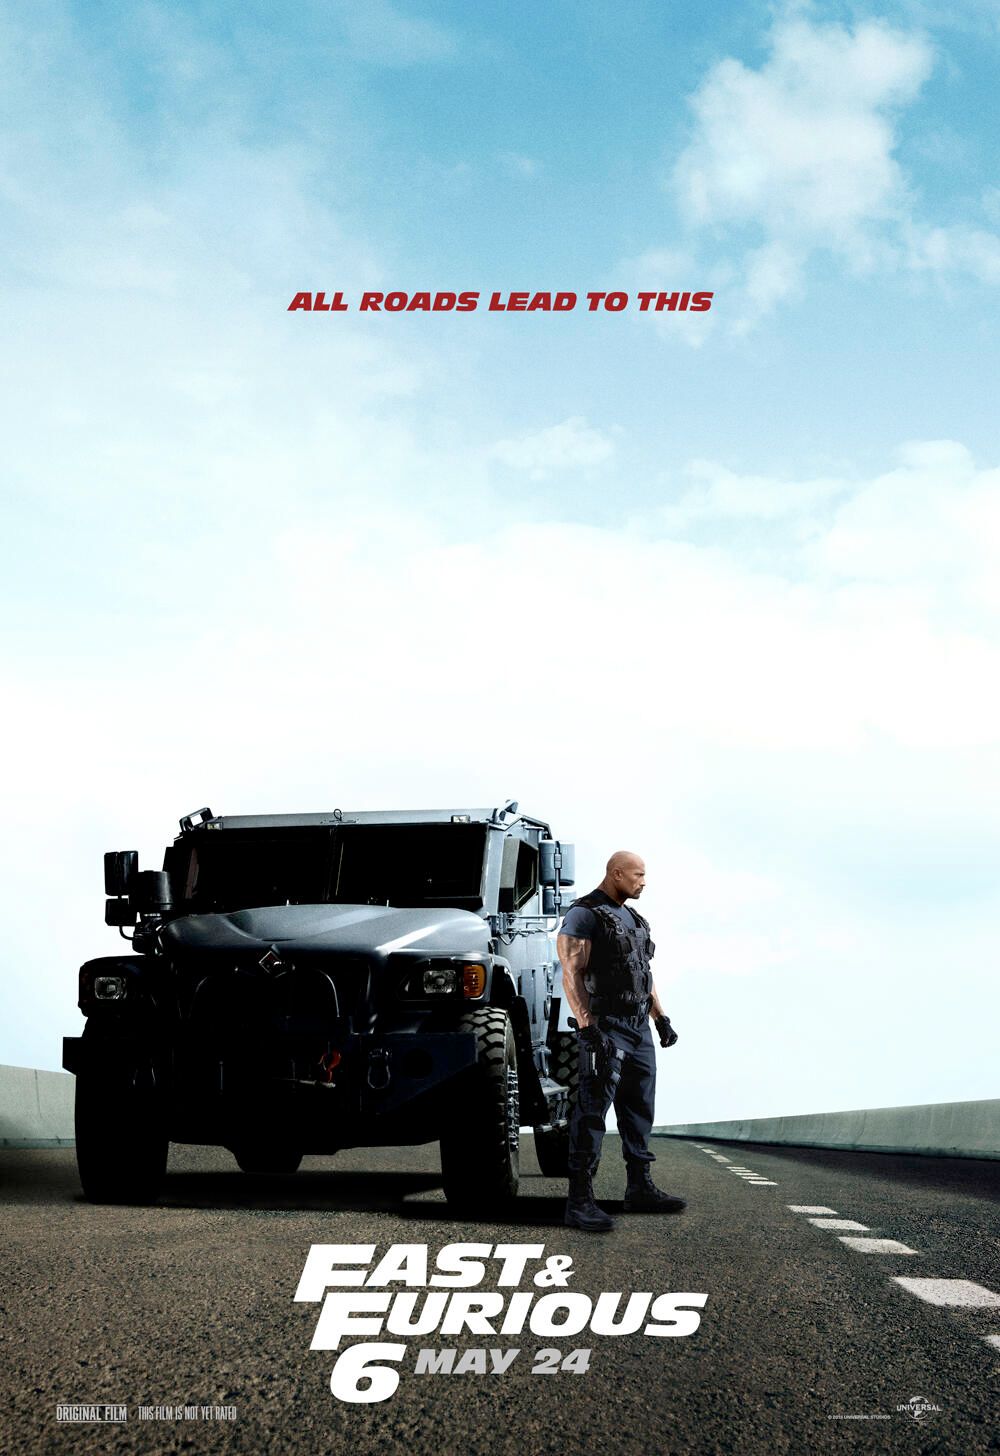 Fast & Furious 6 Poster with Dwayne Johnson as Hobbs